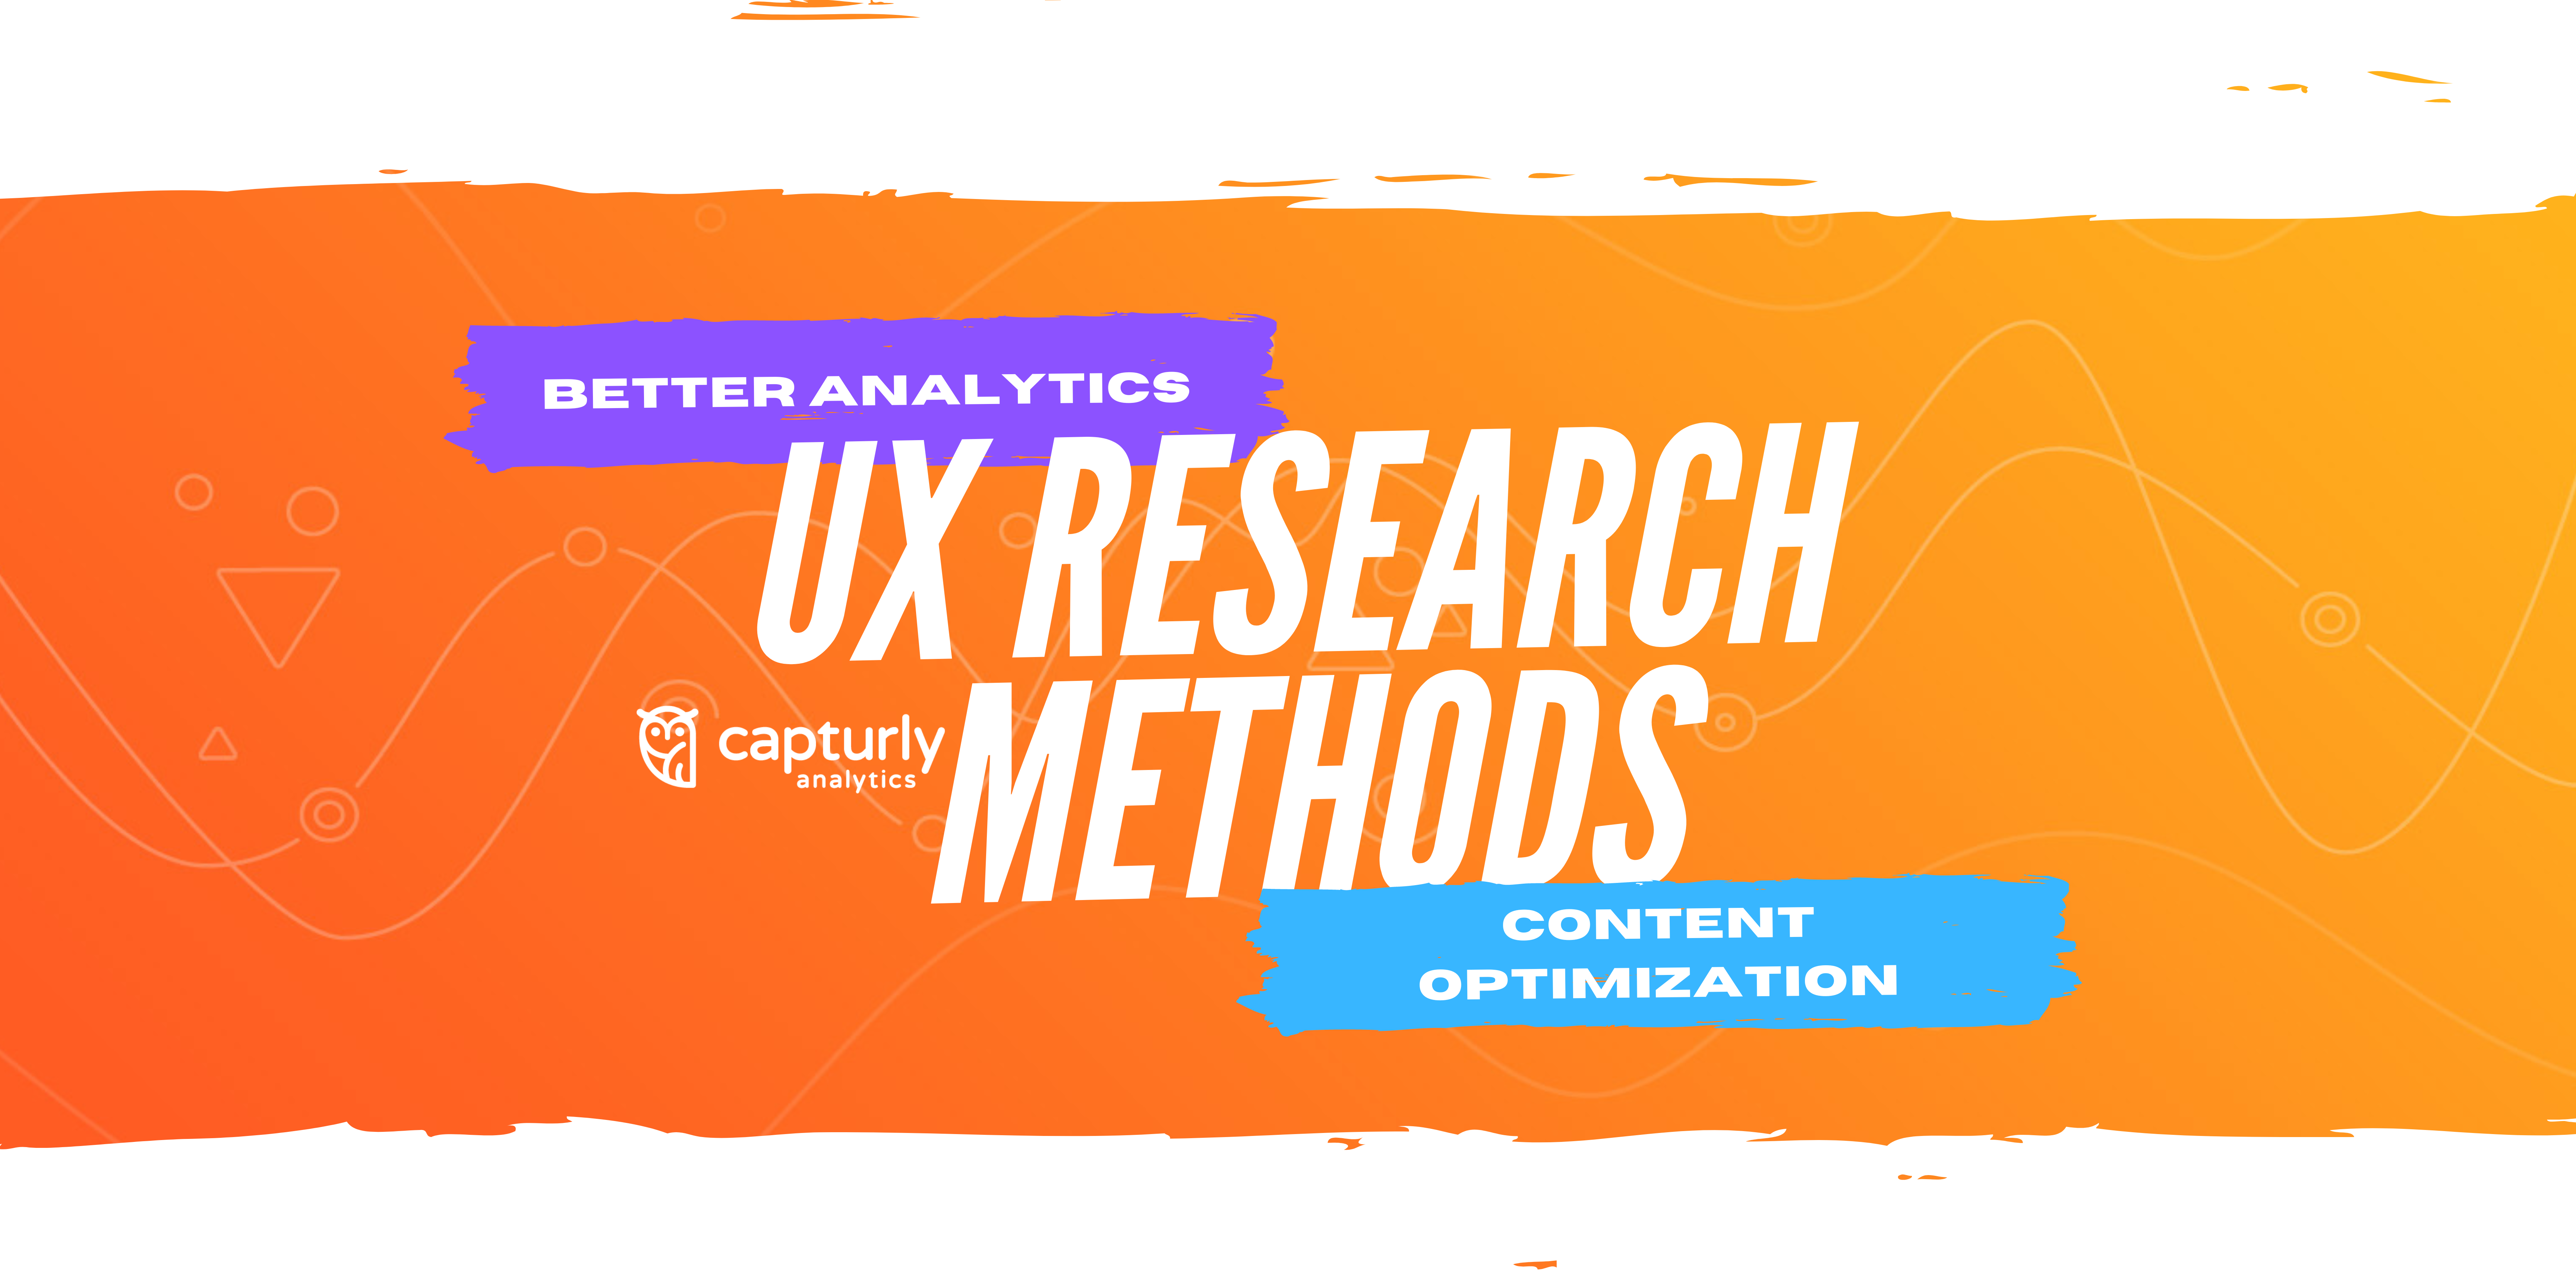 UX Research Methods for Better Analytics and Content Optimization